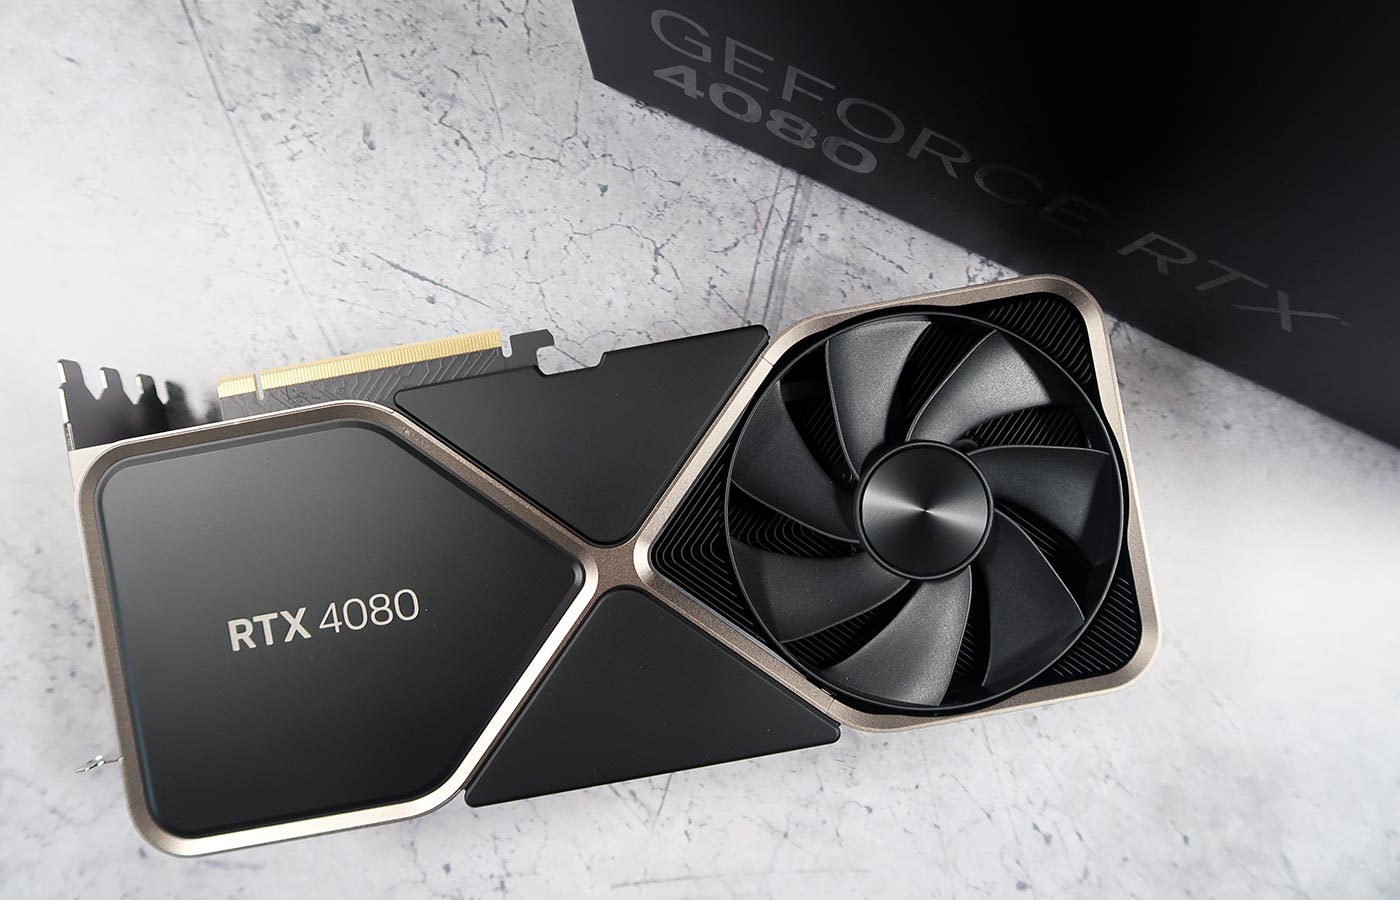 Nvidia GeForce RTX 4080 Founders Edition review: I am the one and